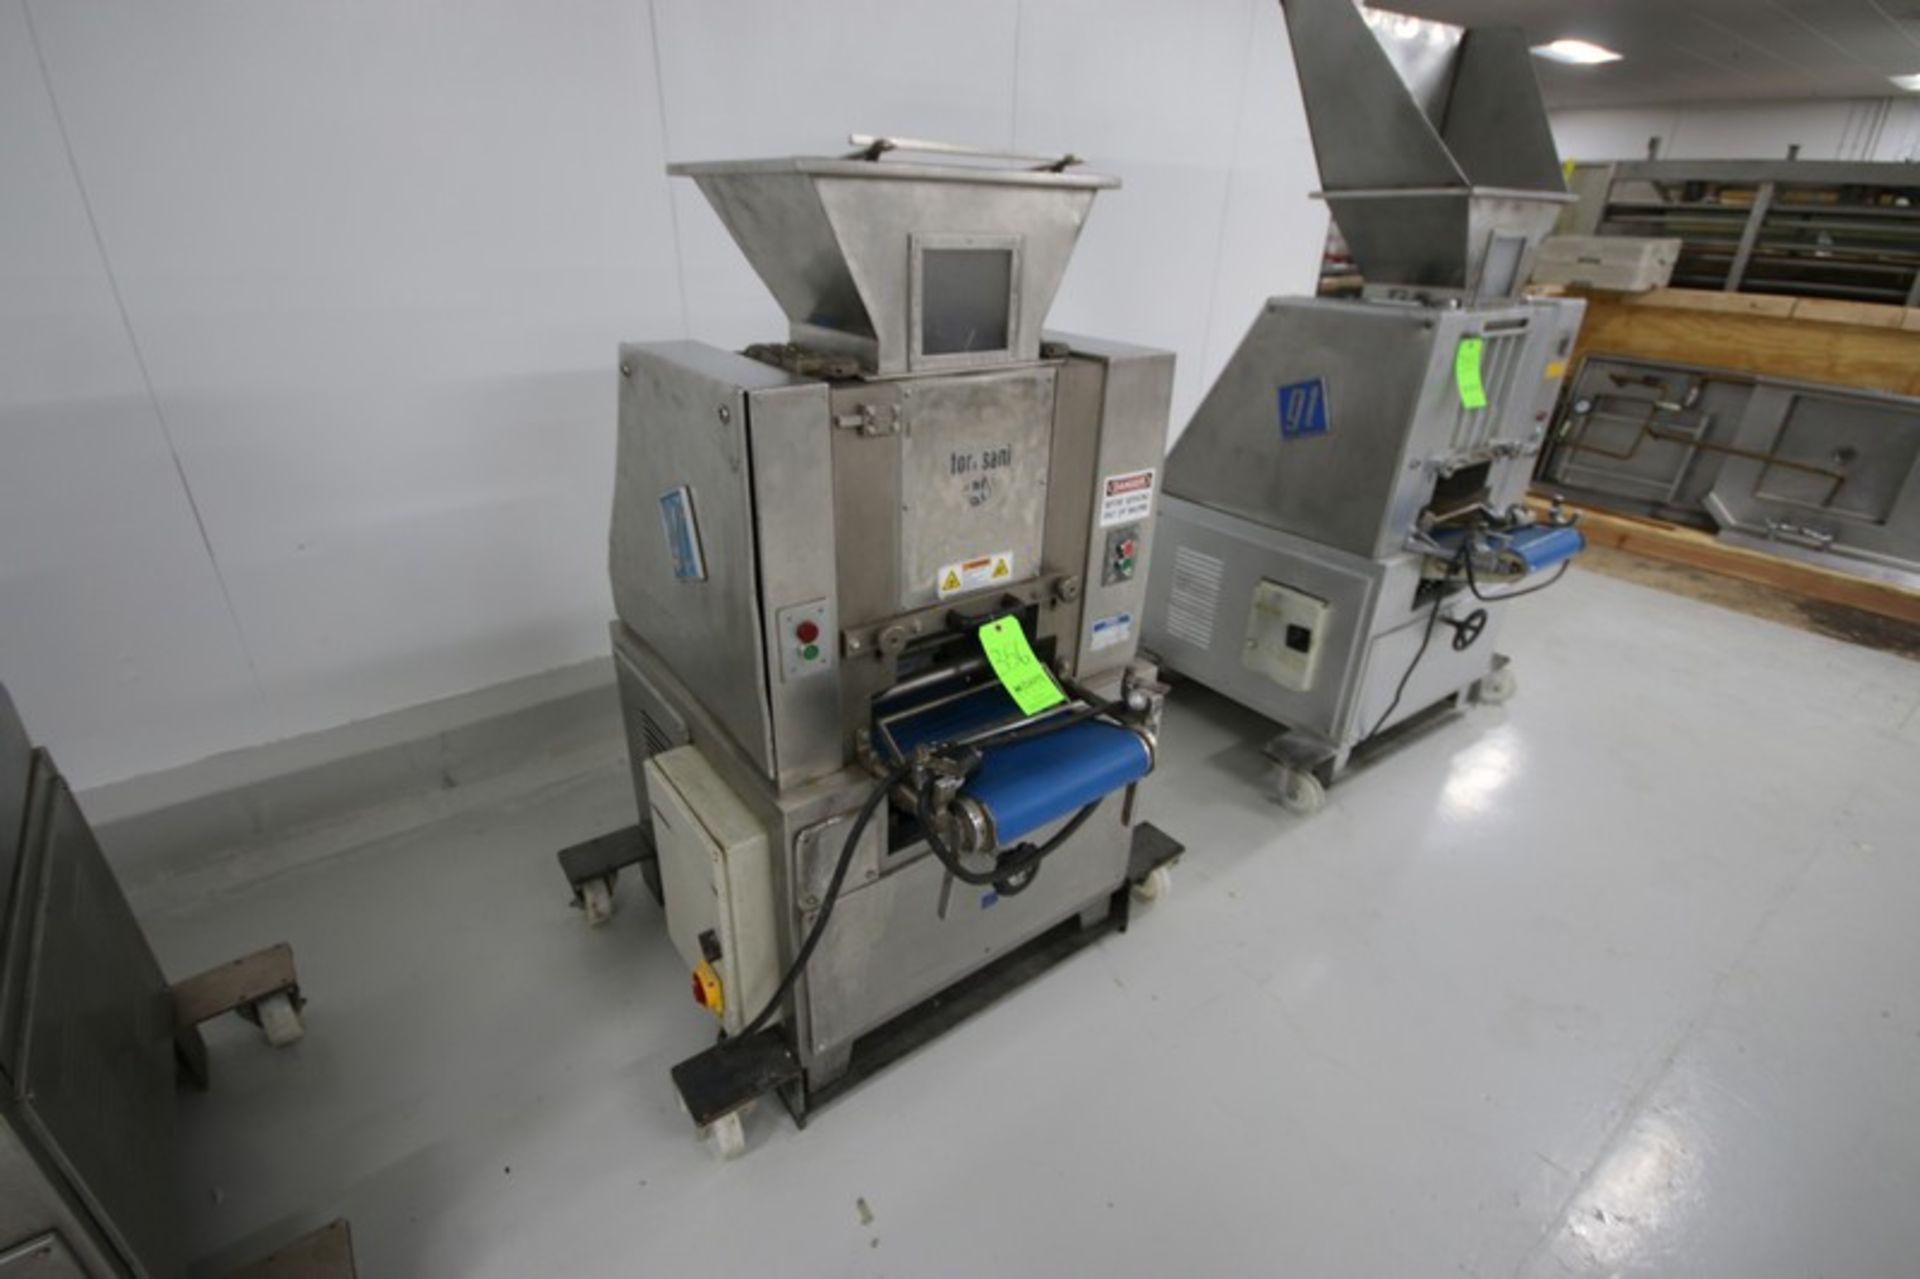 Toresani Pasta Sheeter/Laminator, M/N SFA300A, 220 Volts, 3 Phase, with Outfeed Conveyor, Mounted on - Image 2 of 6